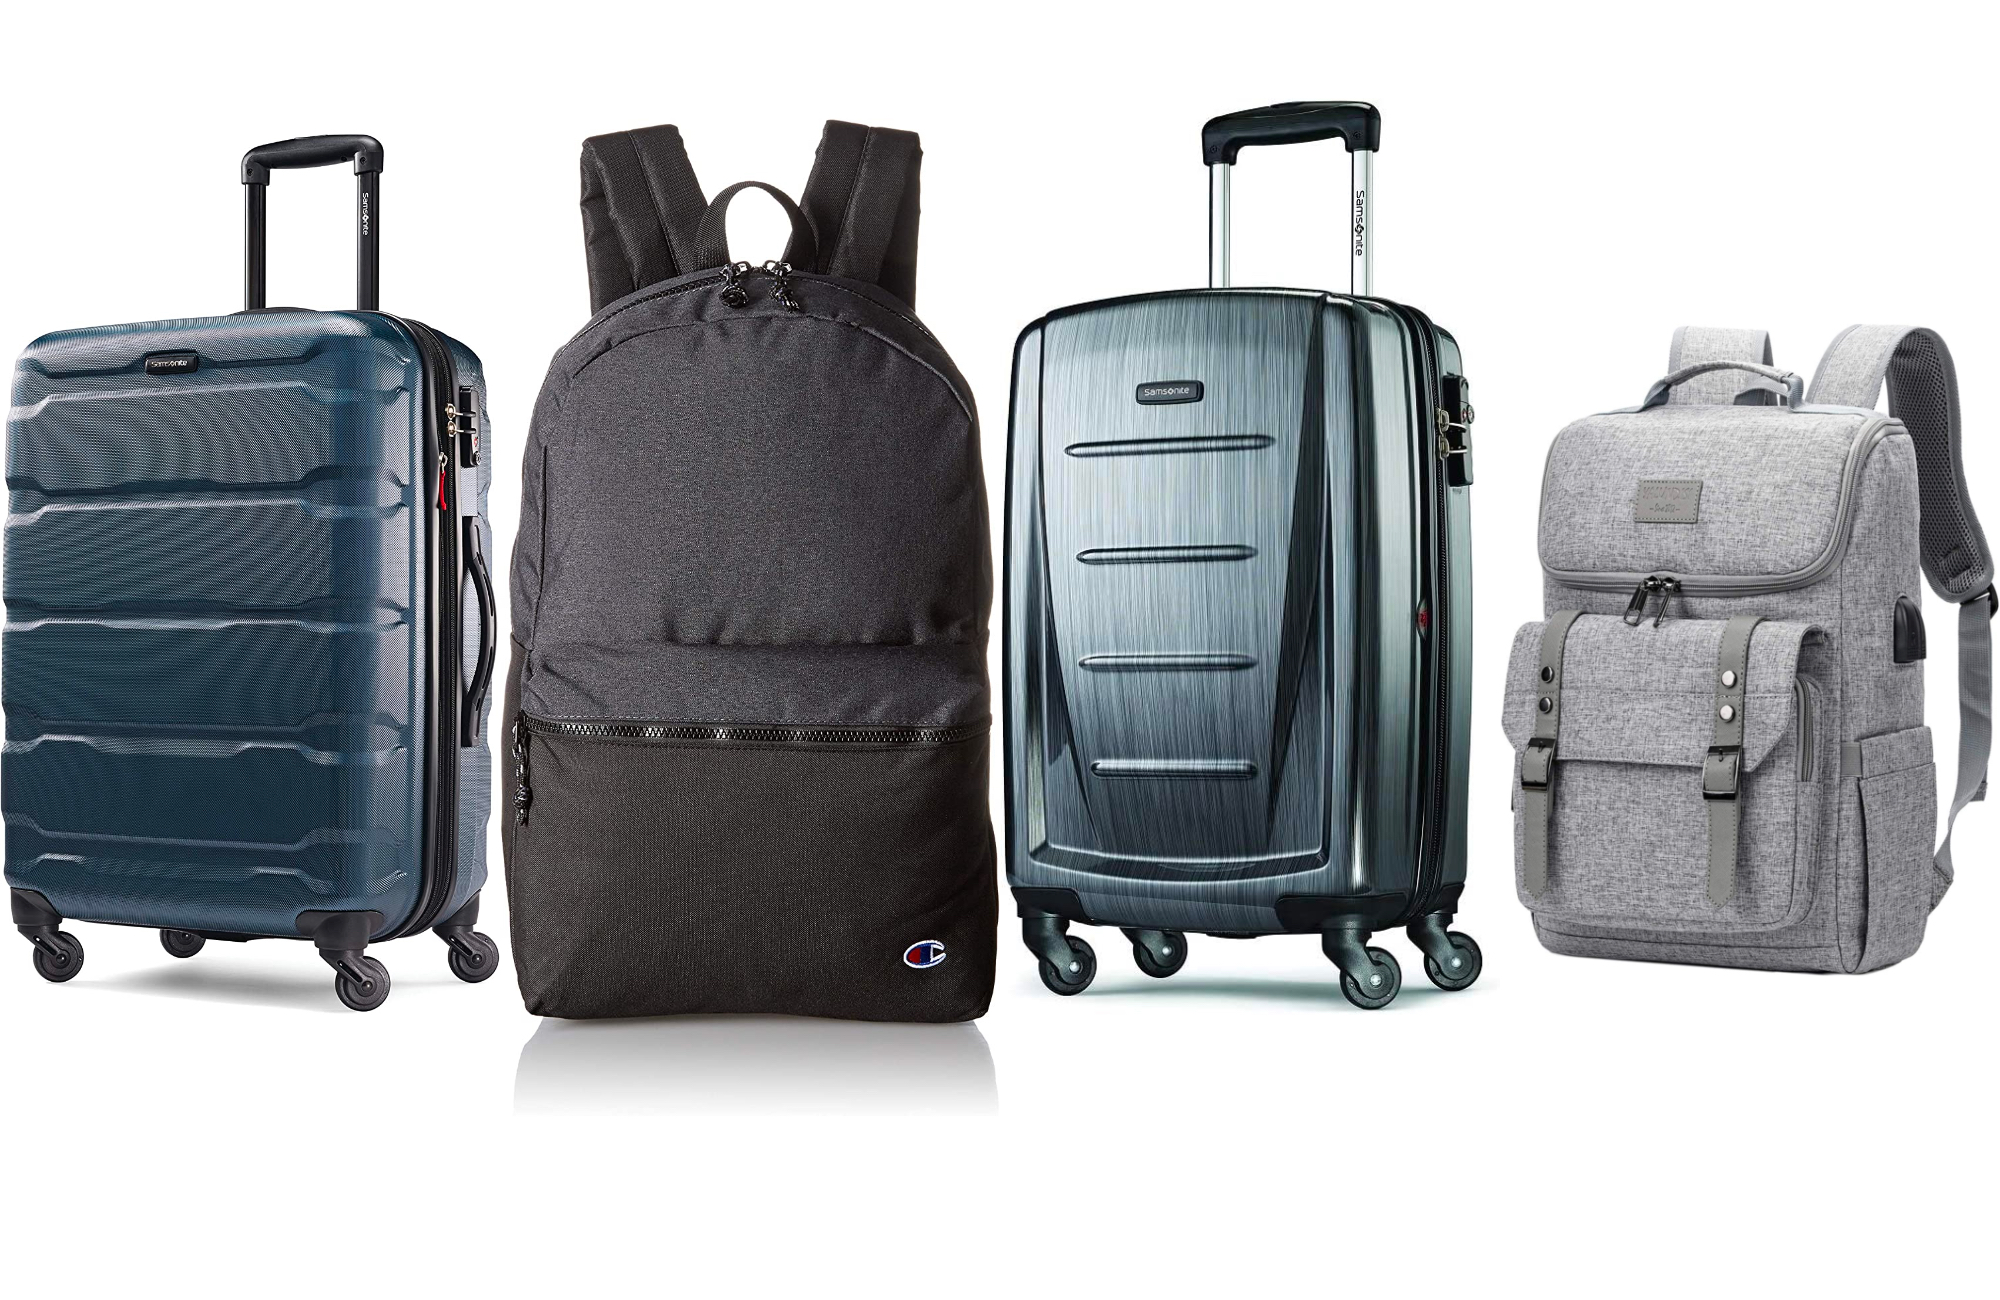 The best luggage deals to shop right now